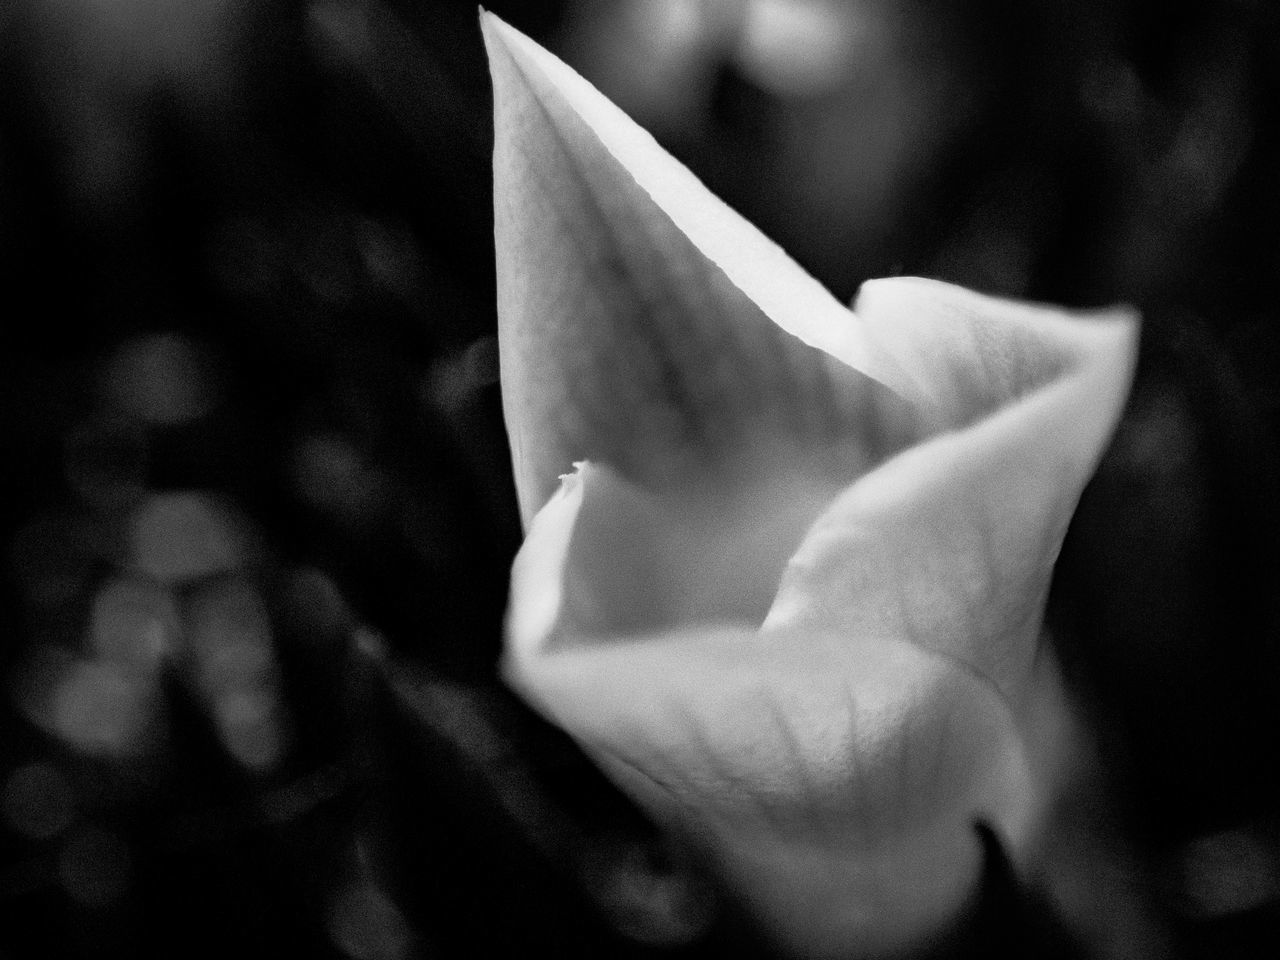 white, darkness, black and white, black, flower, close-up, monochrome photography, monochrome, macro photography, flowering plant, plant, beauty in nature, petal, focus on foreground, fragility, no people, light, nature, leaf, freshness, growth